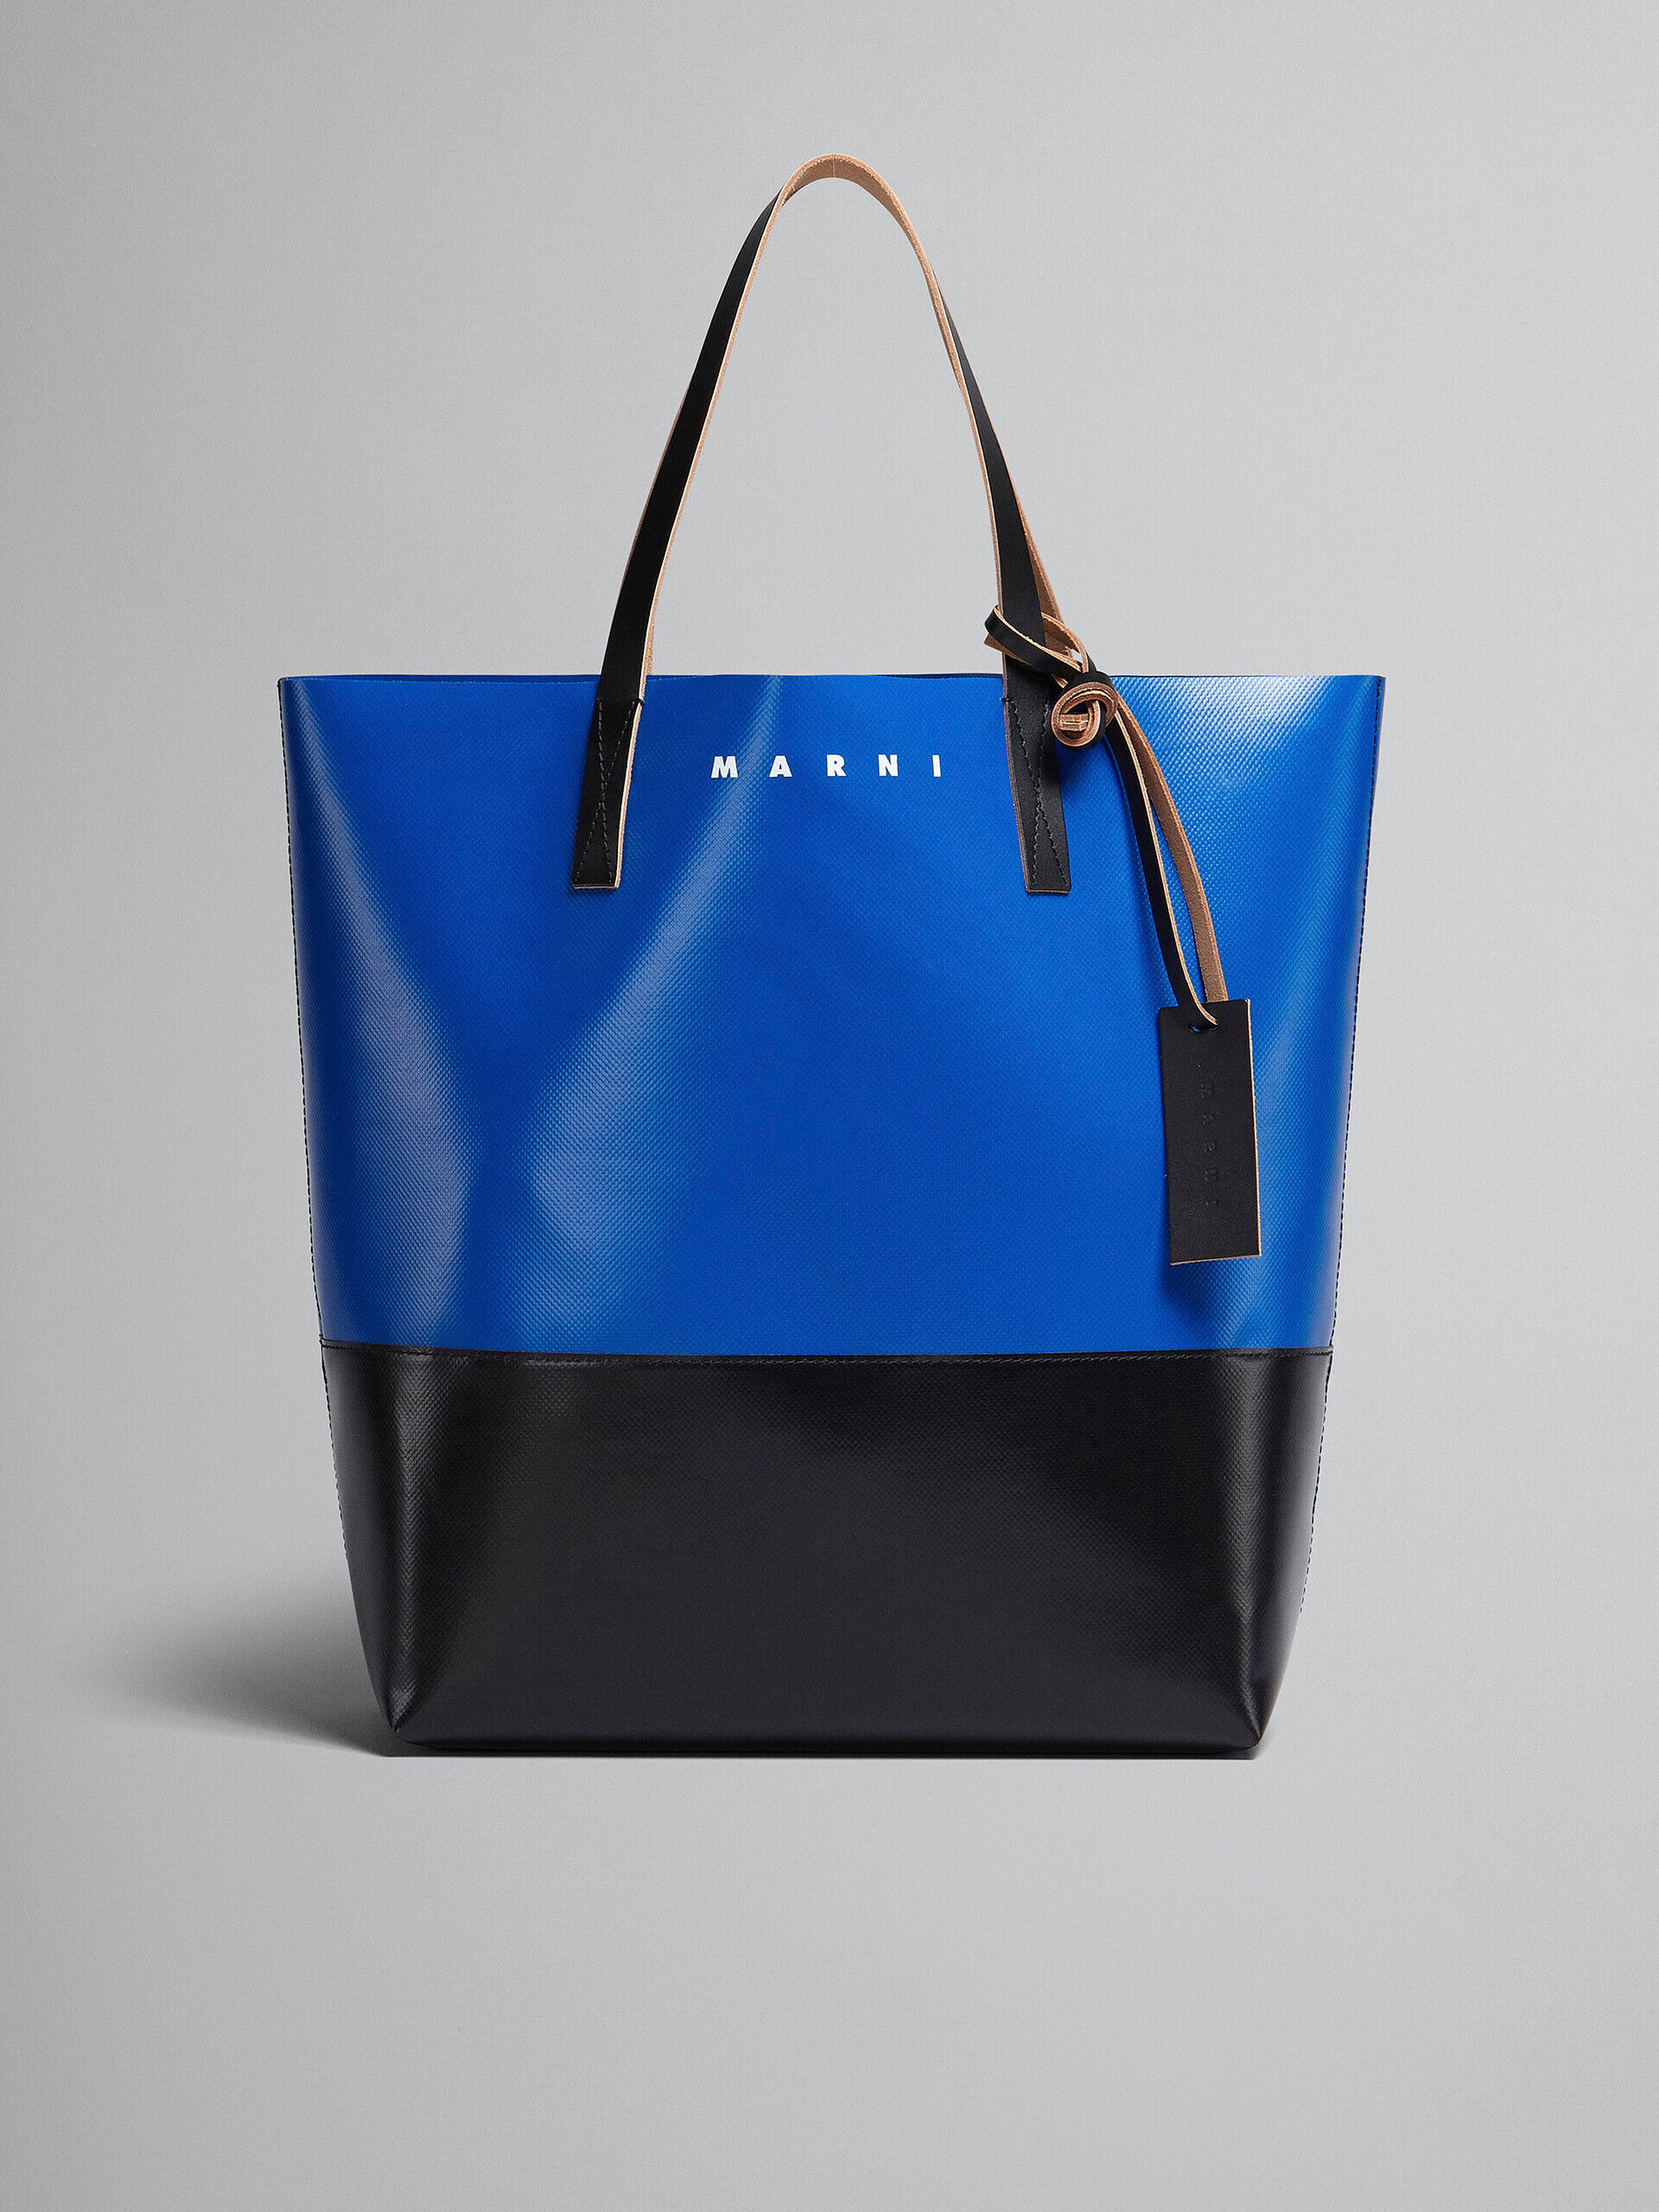 Tribeca shopping bag in blue and black | Marni